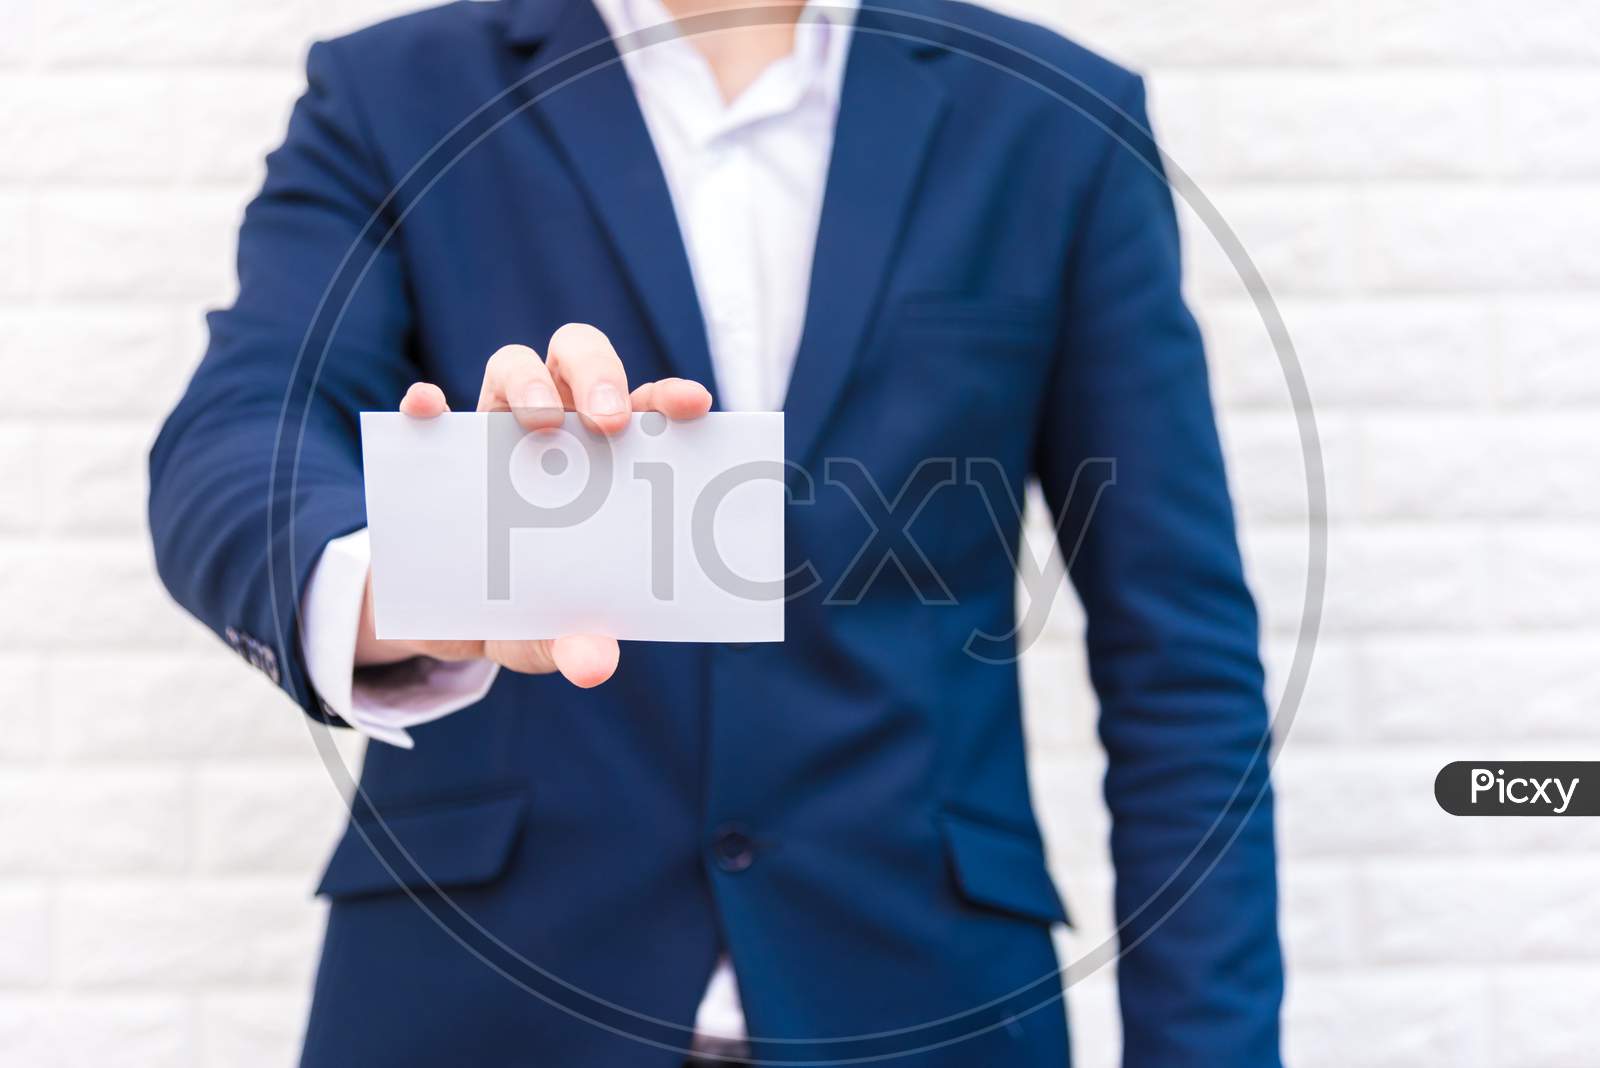 Business Man Showing White Paper. Man  Wearing Blue Suit And Holding White Blank Card. Lifestyle And Working Concept. Business And Object Theme. Blank Space In Paper For Insert Text.